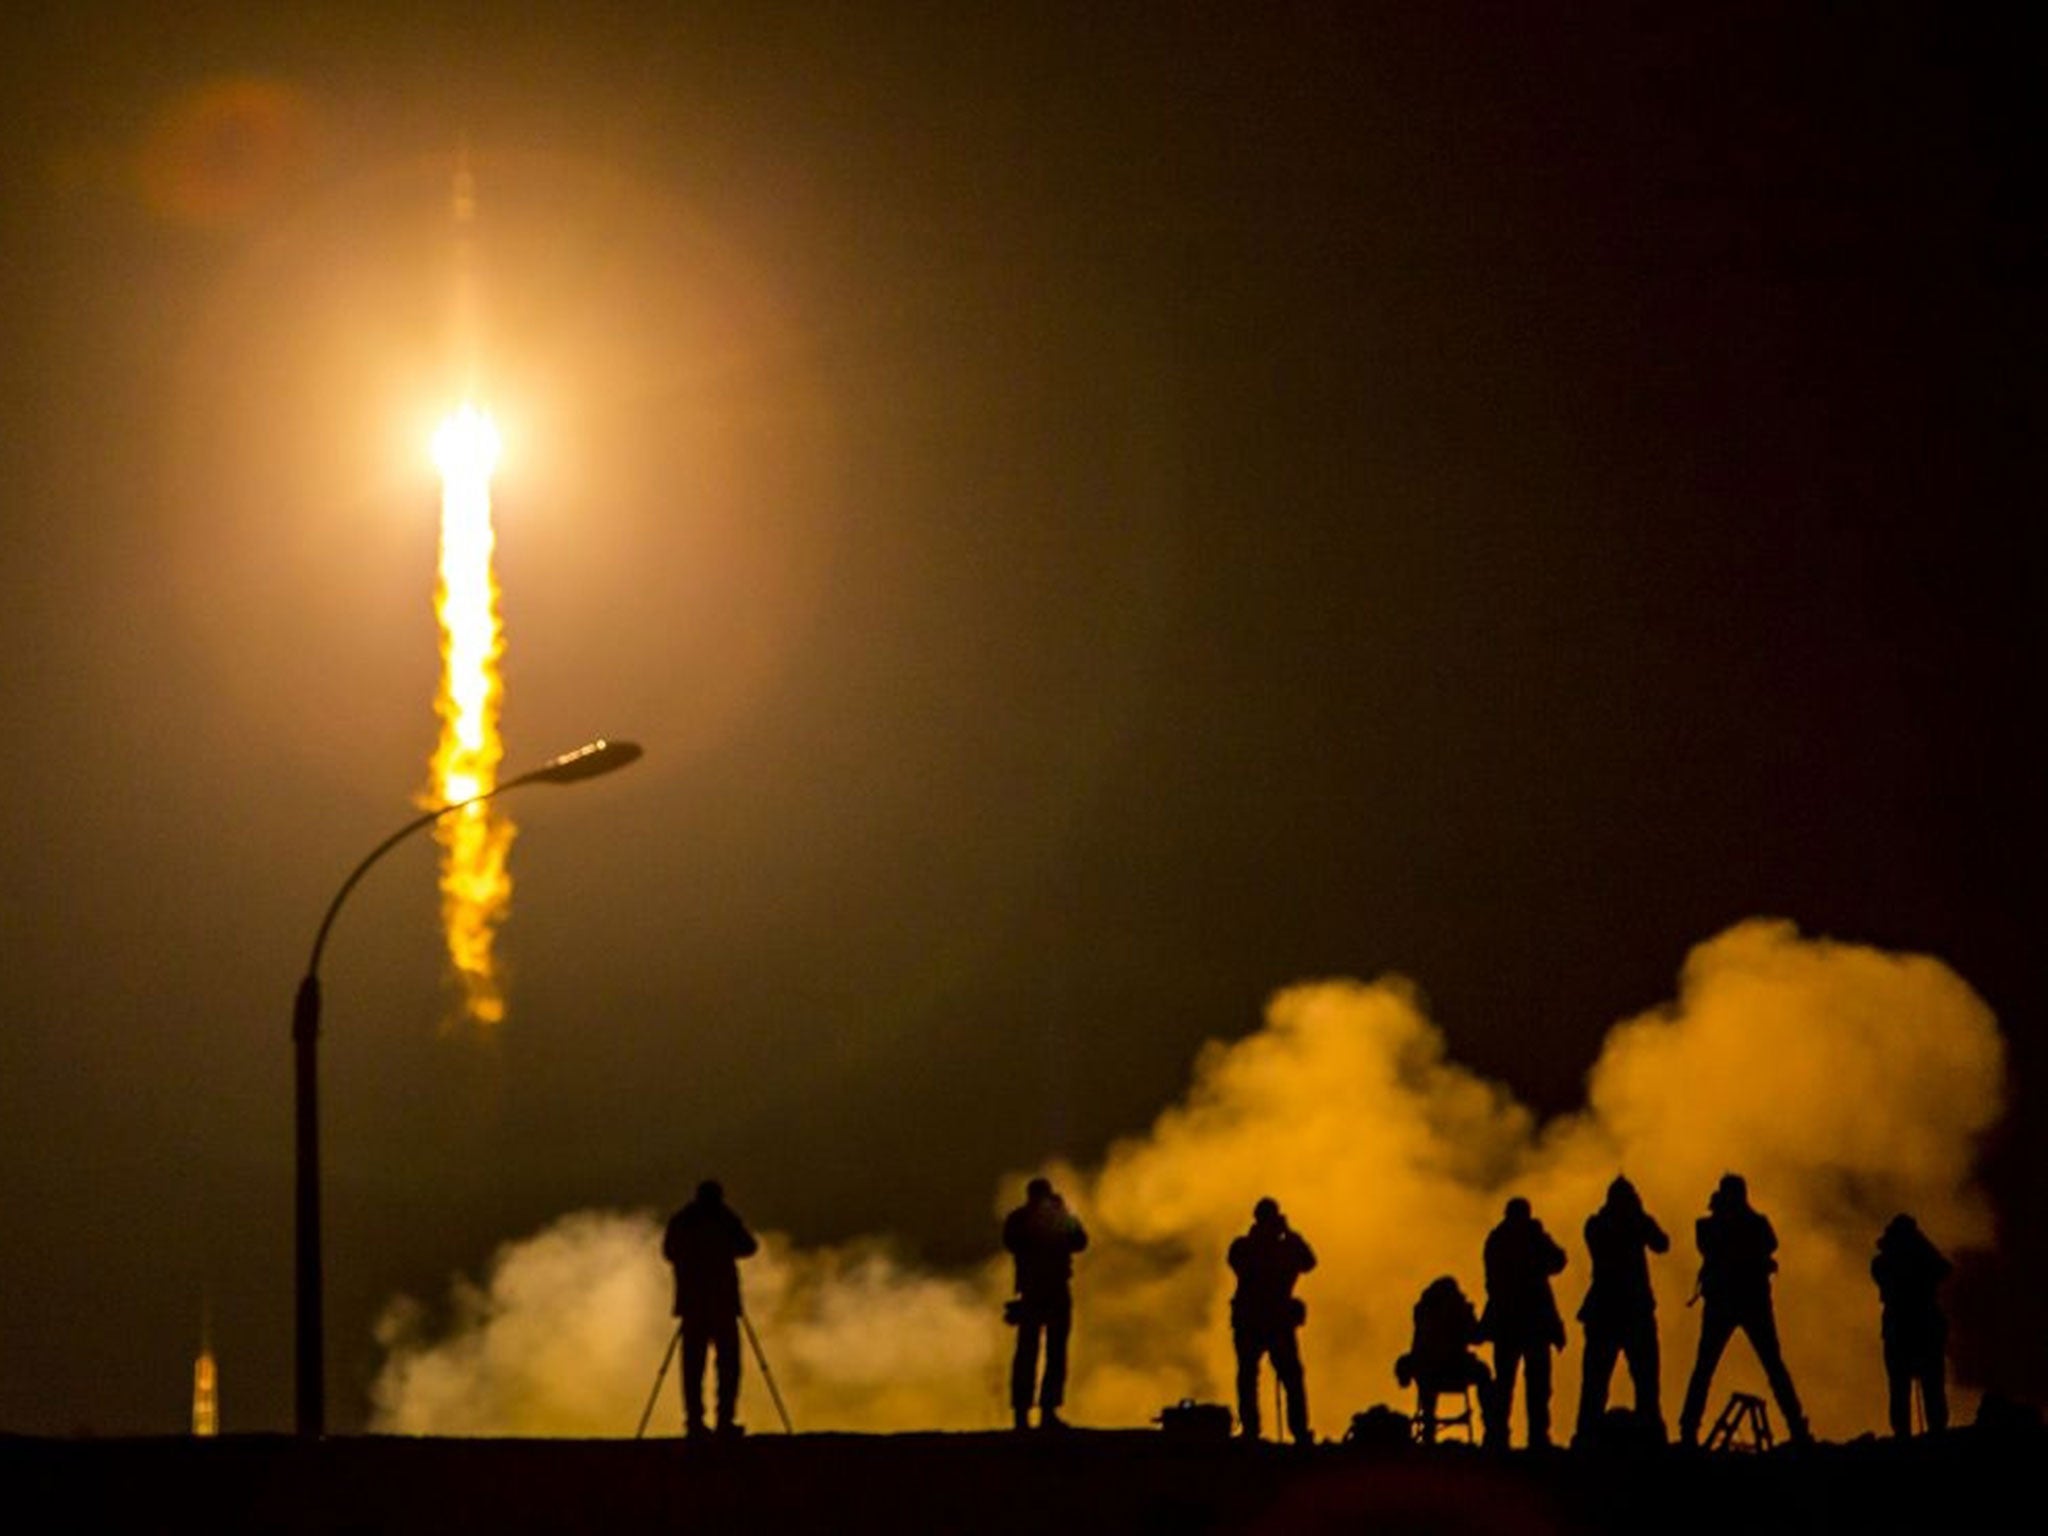 A Soyuz spacecraft launches to the International Space Station